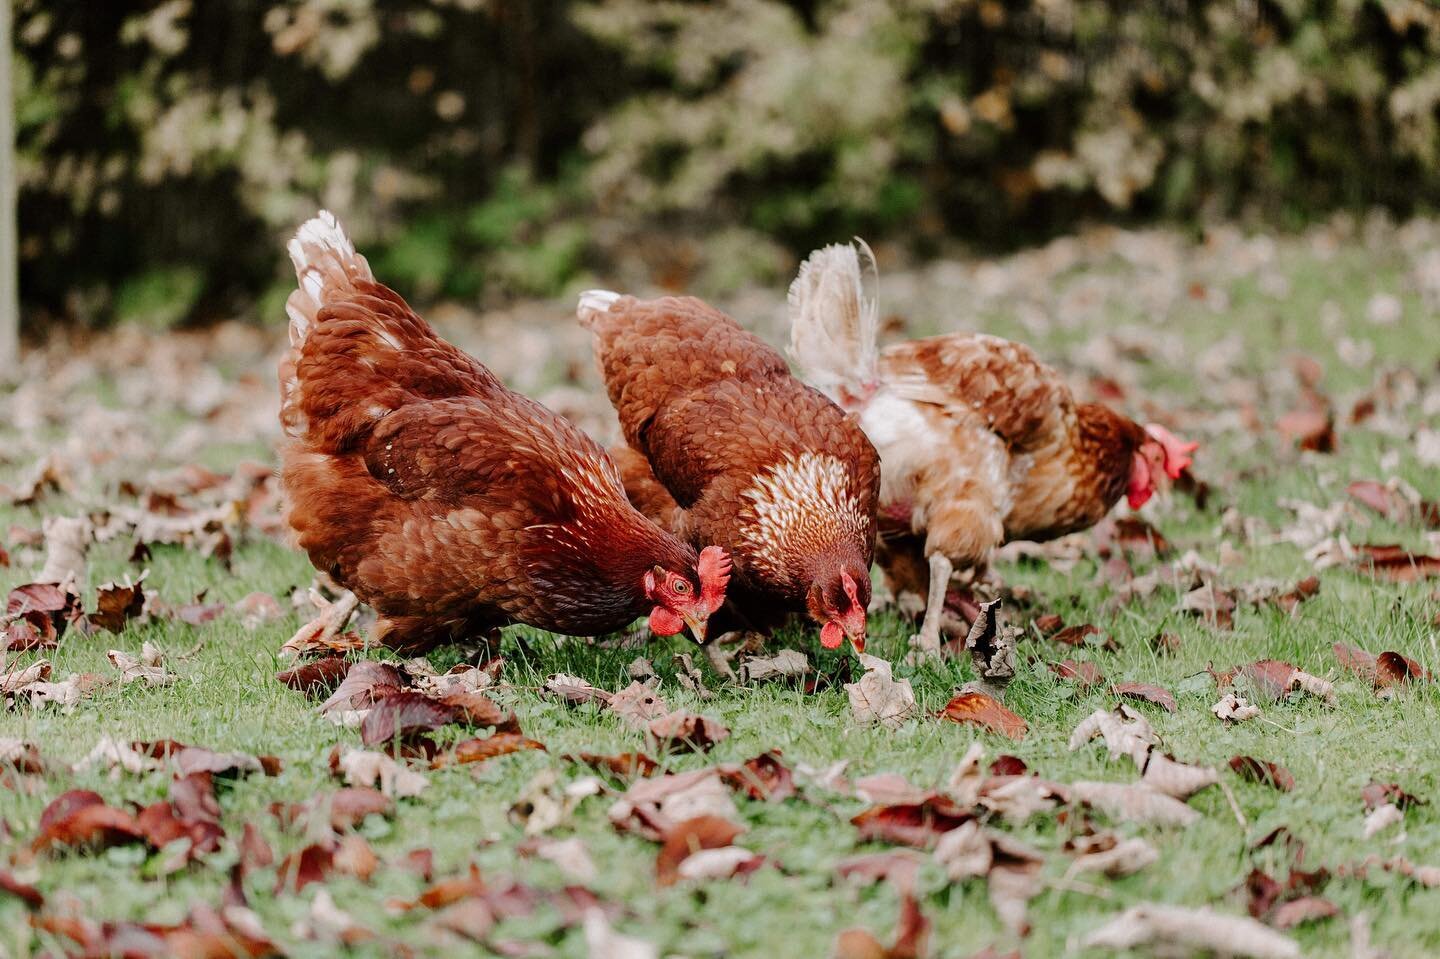 Happy Monday folks! 🐓🌿⁠⠀
⁠⠀
Looking for a post-lockdown staycation? We have limited availability in April and May and would love to welcome you! ⁠⠀
⁠⠀
Get in touch &rarr; hillhousefarmcottages.com⁠⠀
⁠⠀
#freerange #vegansofig #rescuechickens #hillho